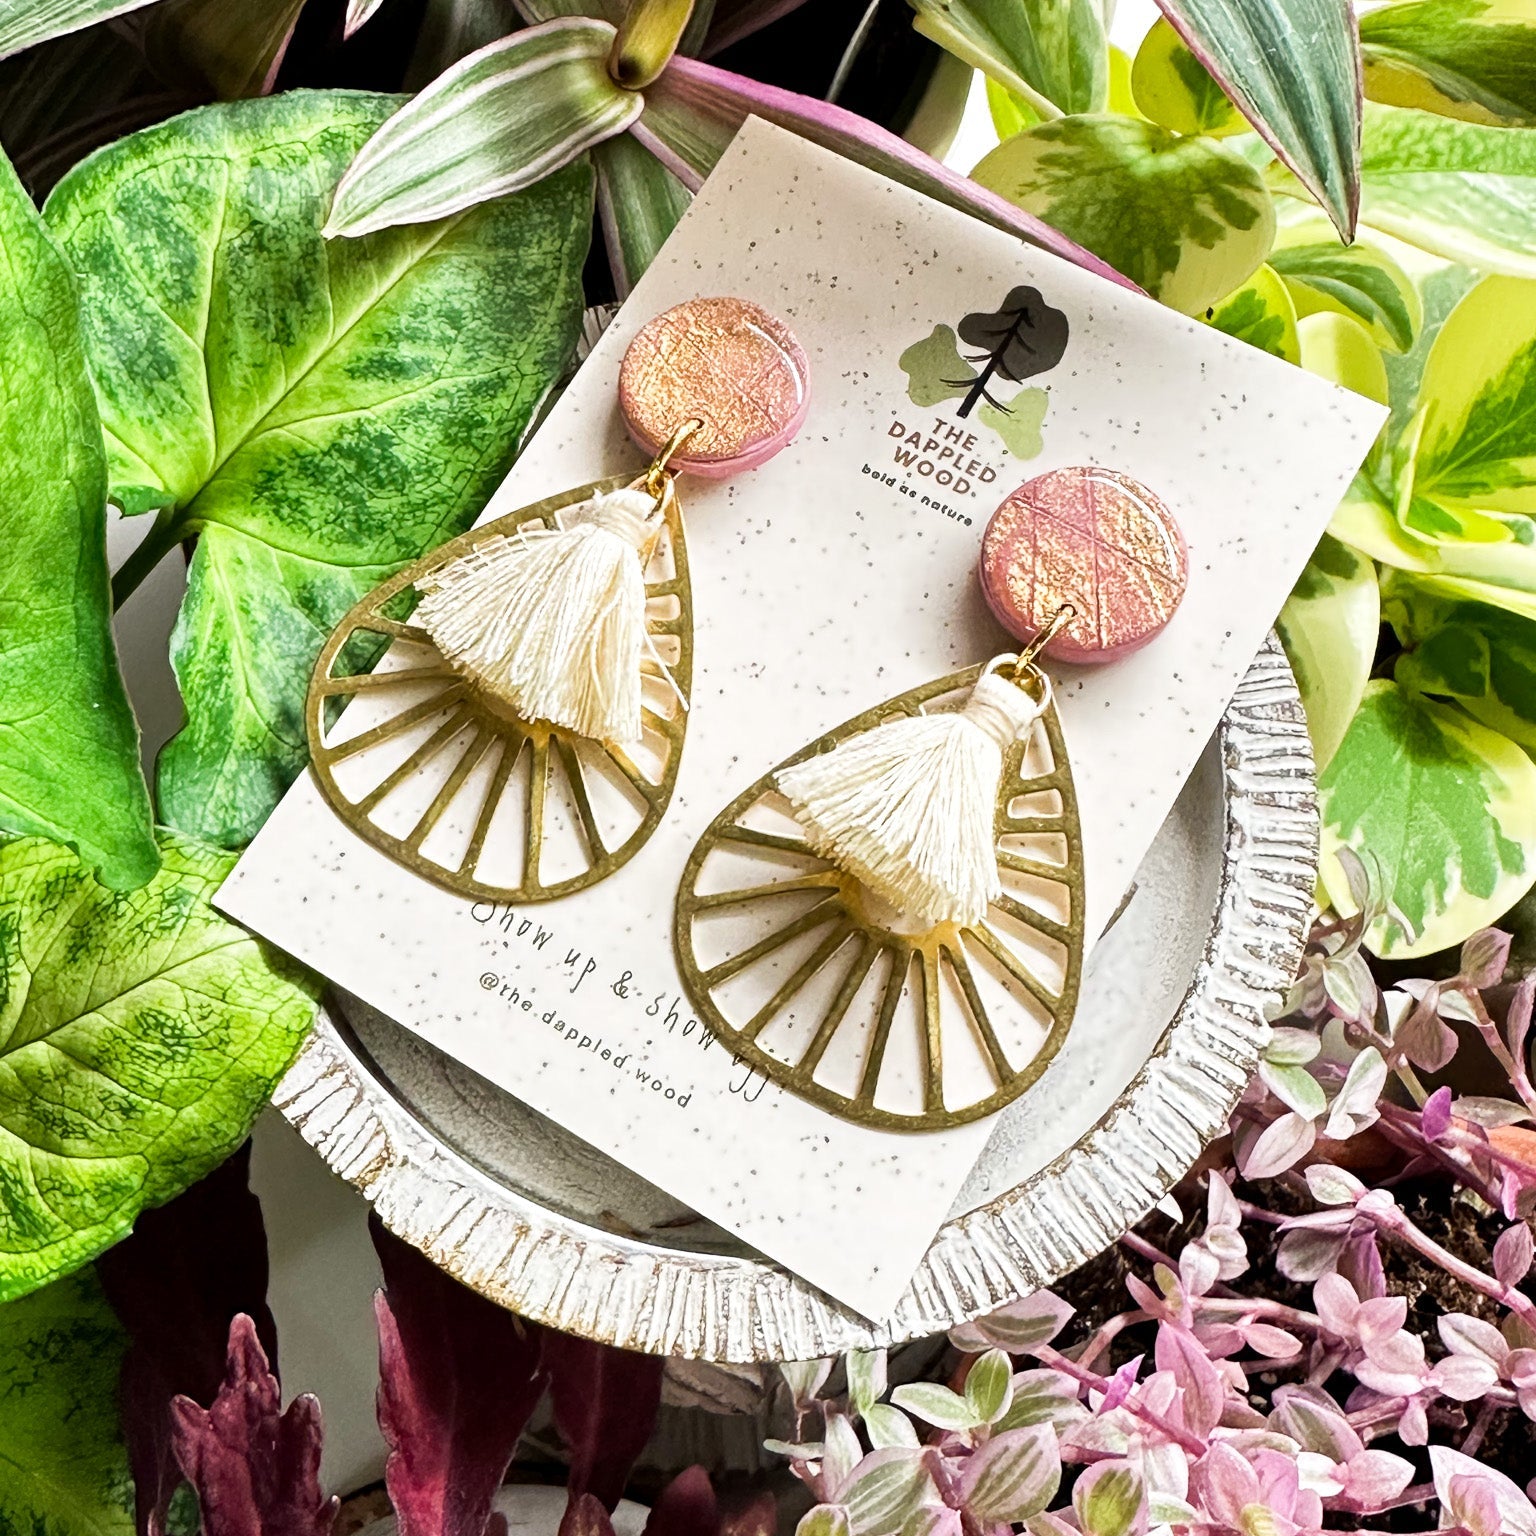 Handcrafted polymer clay earrings named 'Willa', showcasing a sparkling pink circular top with an openwork gold fan design and delicate tassels, presented against a speckled card with The Dappled Wood logo, surrounded by vibrant green and pink plants.